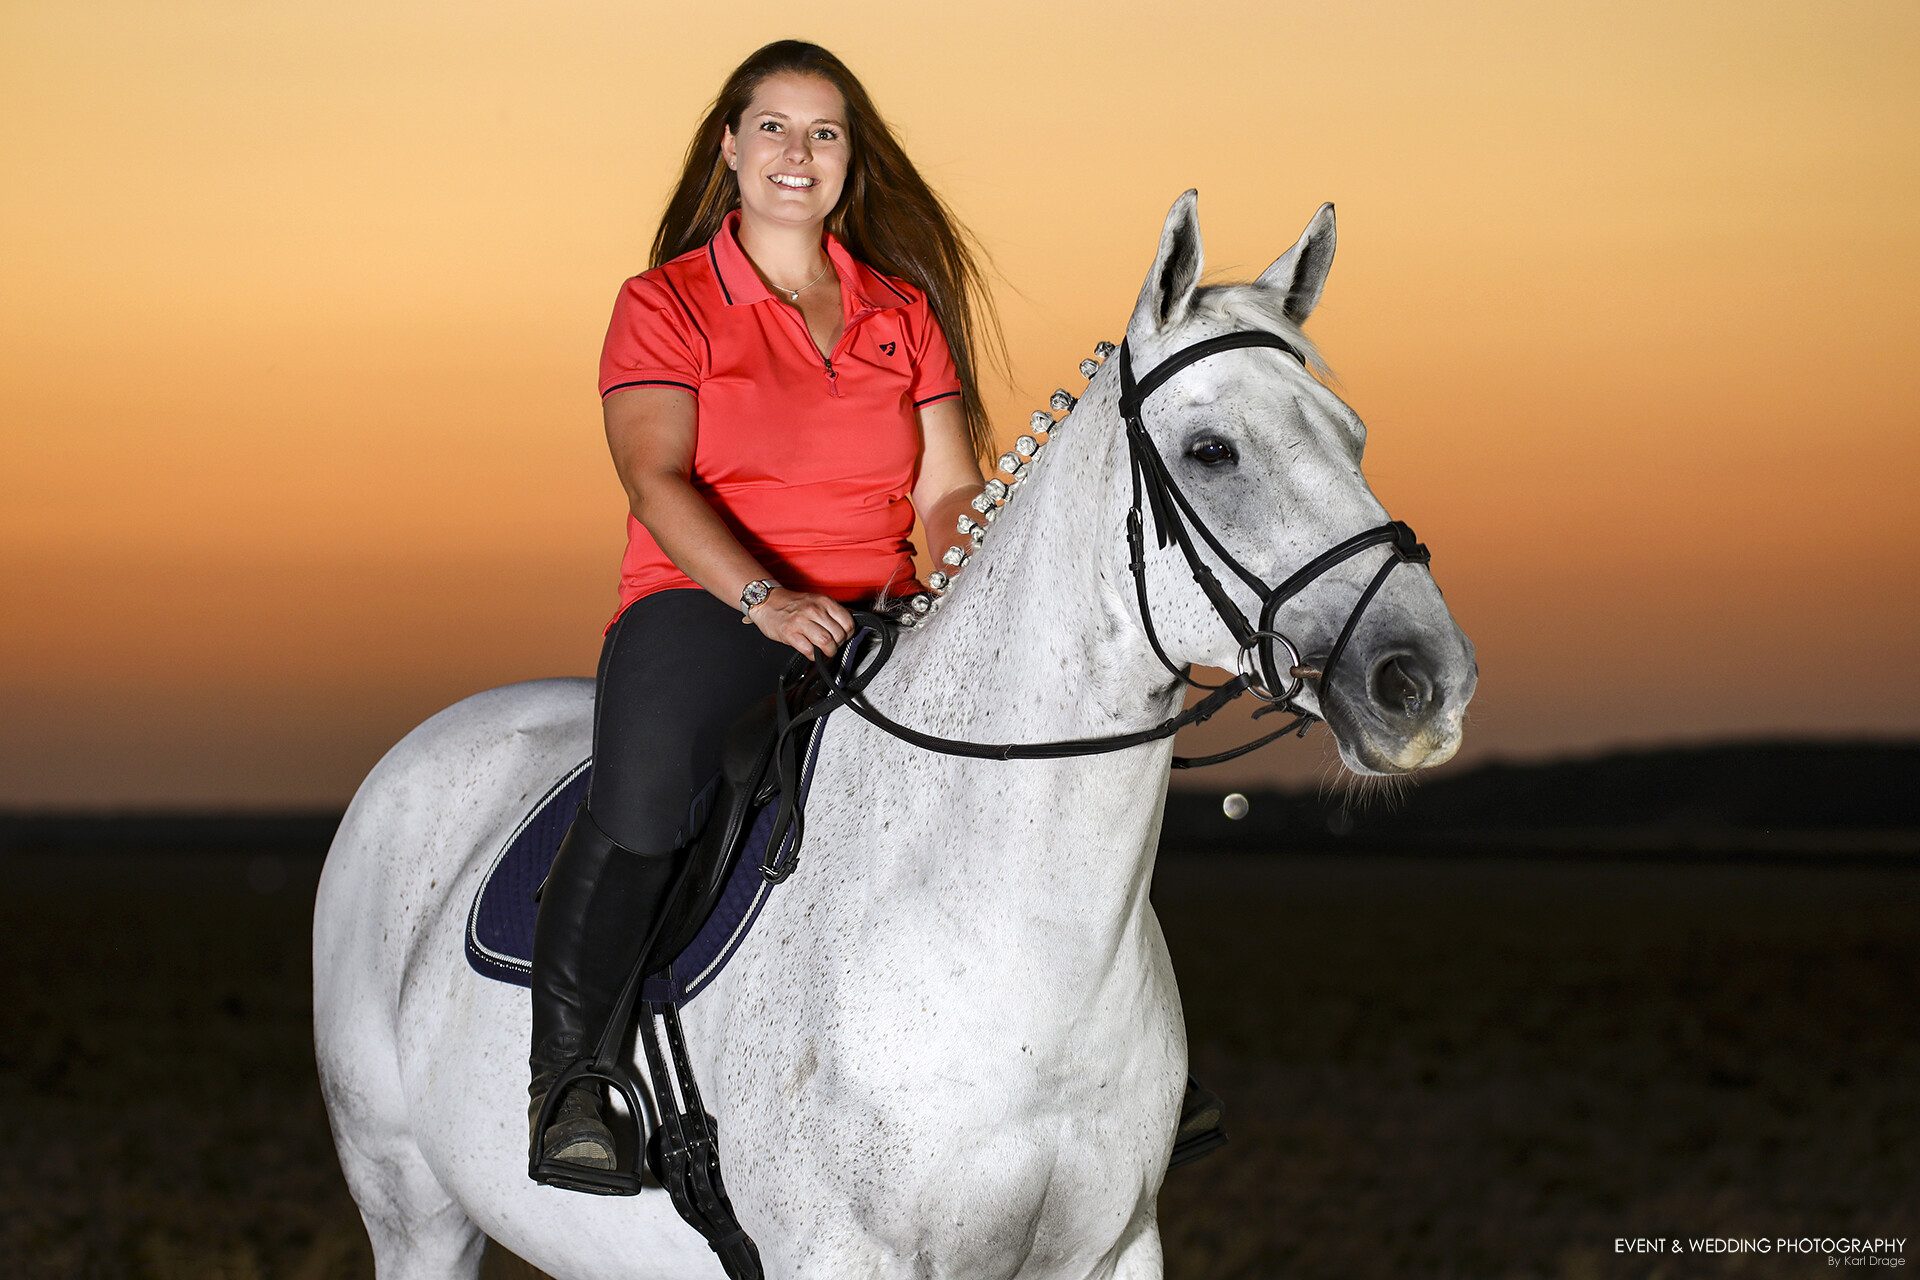 Studio lights used to illuminate horse and rider after the sun has set